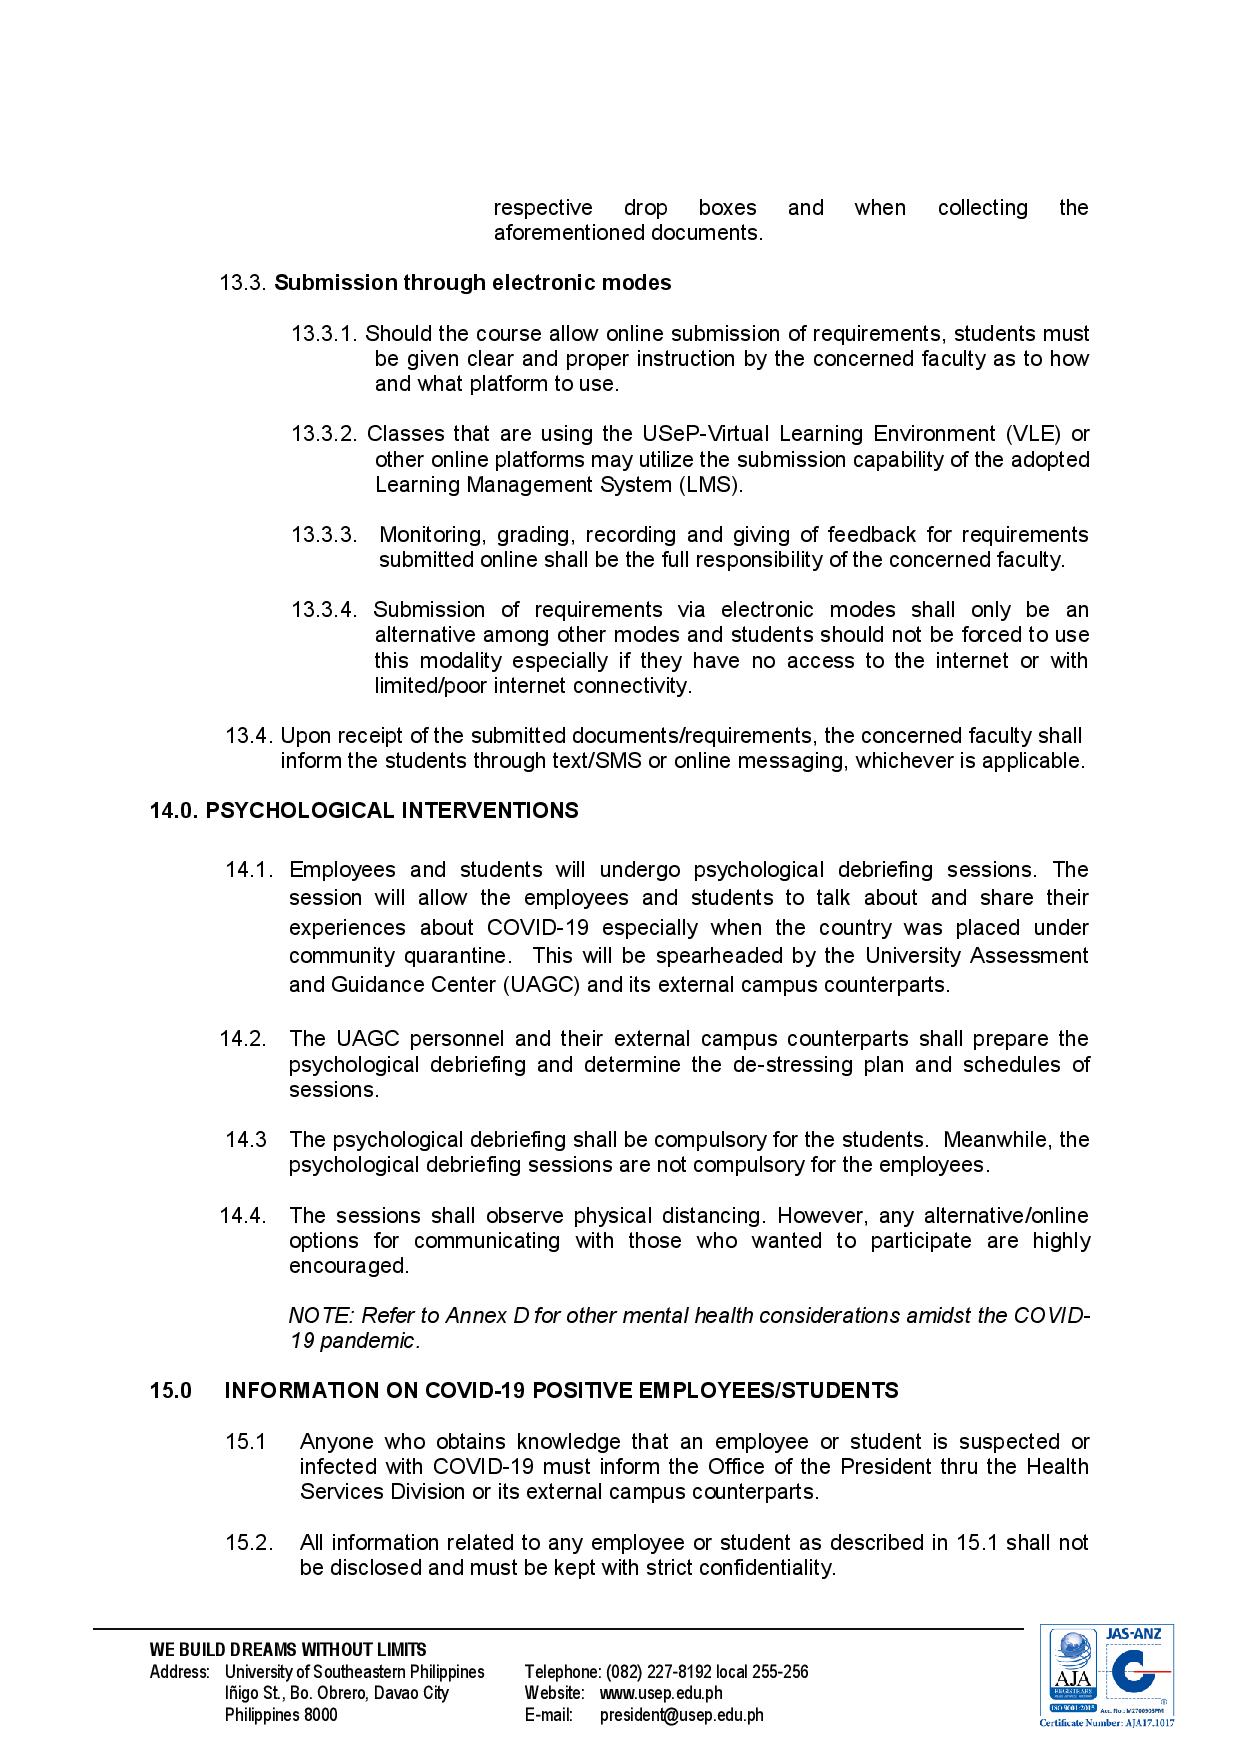 mc-03-s-2020-memorandum-circular-on-administrative-guidelines-upon-resumption-of-work-and-conduct-of-classes-under-the-new-normal-condition-1-page-013